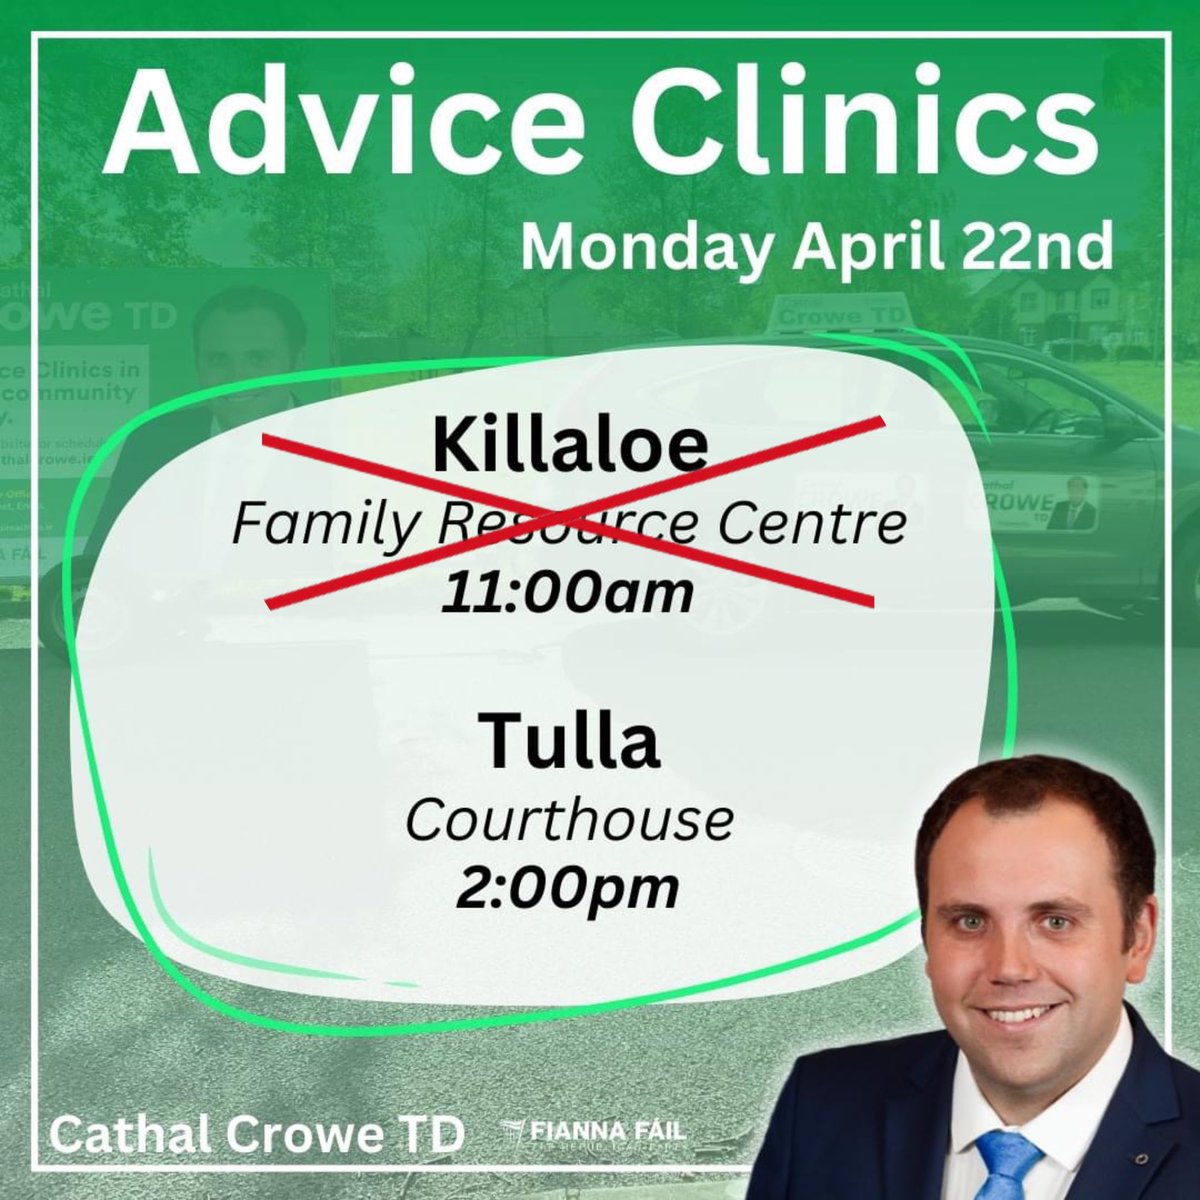 ⚠️ EAST • CLARE • ADVICE • CLINIC ⚠️ I’ll be in Tulla tomorrow afternoon for an advice clinic. Unfortunately I have to cancel my planned morning advice clinic in Killaloe, but will try my best to get a new one scheduled. All welcome in Tulla - no appointments required!